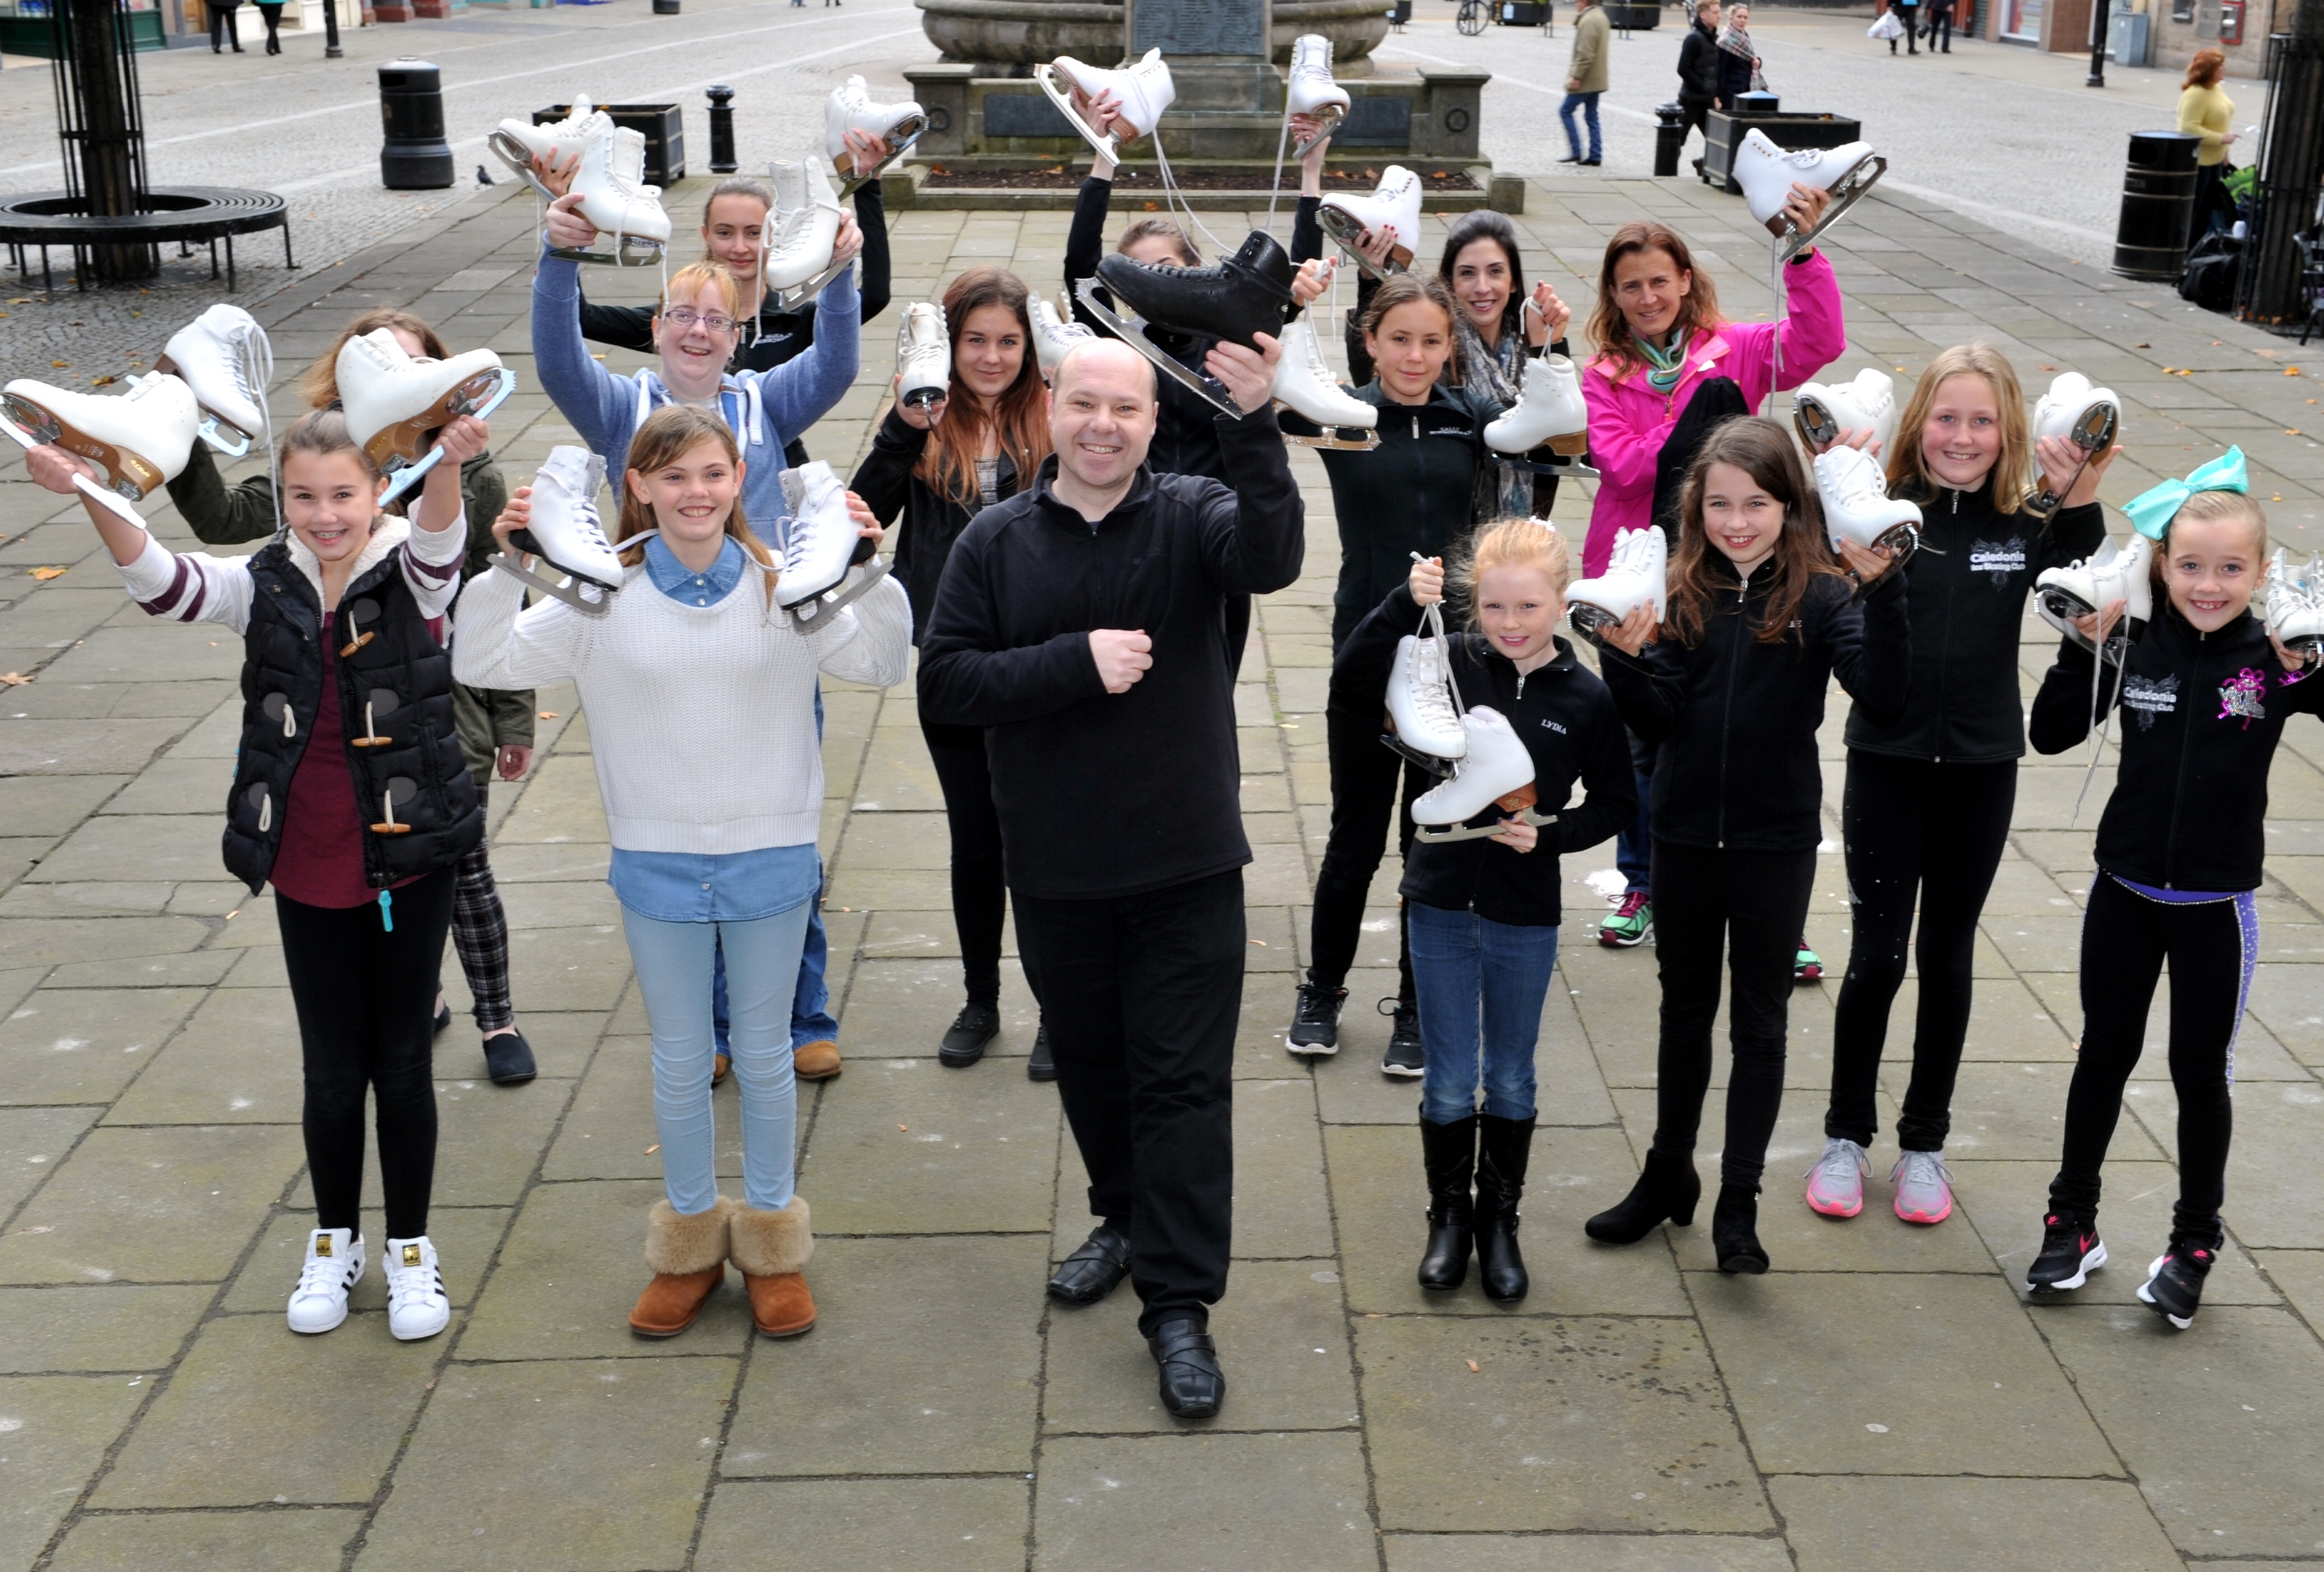 Jon Belhari and members of the Caledonia Ice Skating Club, prepare for an extravaganza of ice skating on the Plainstones in Elgin High Street, this winter.